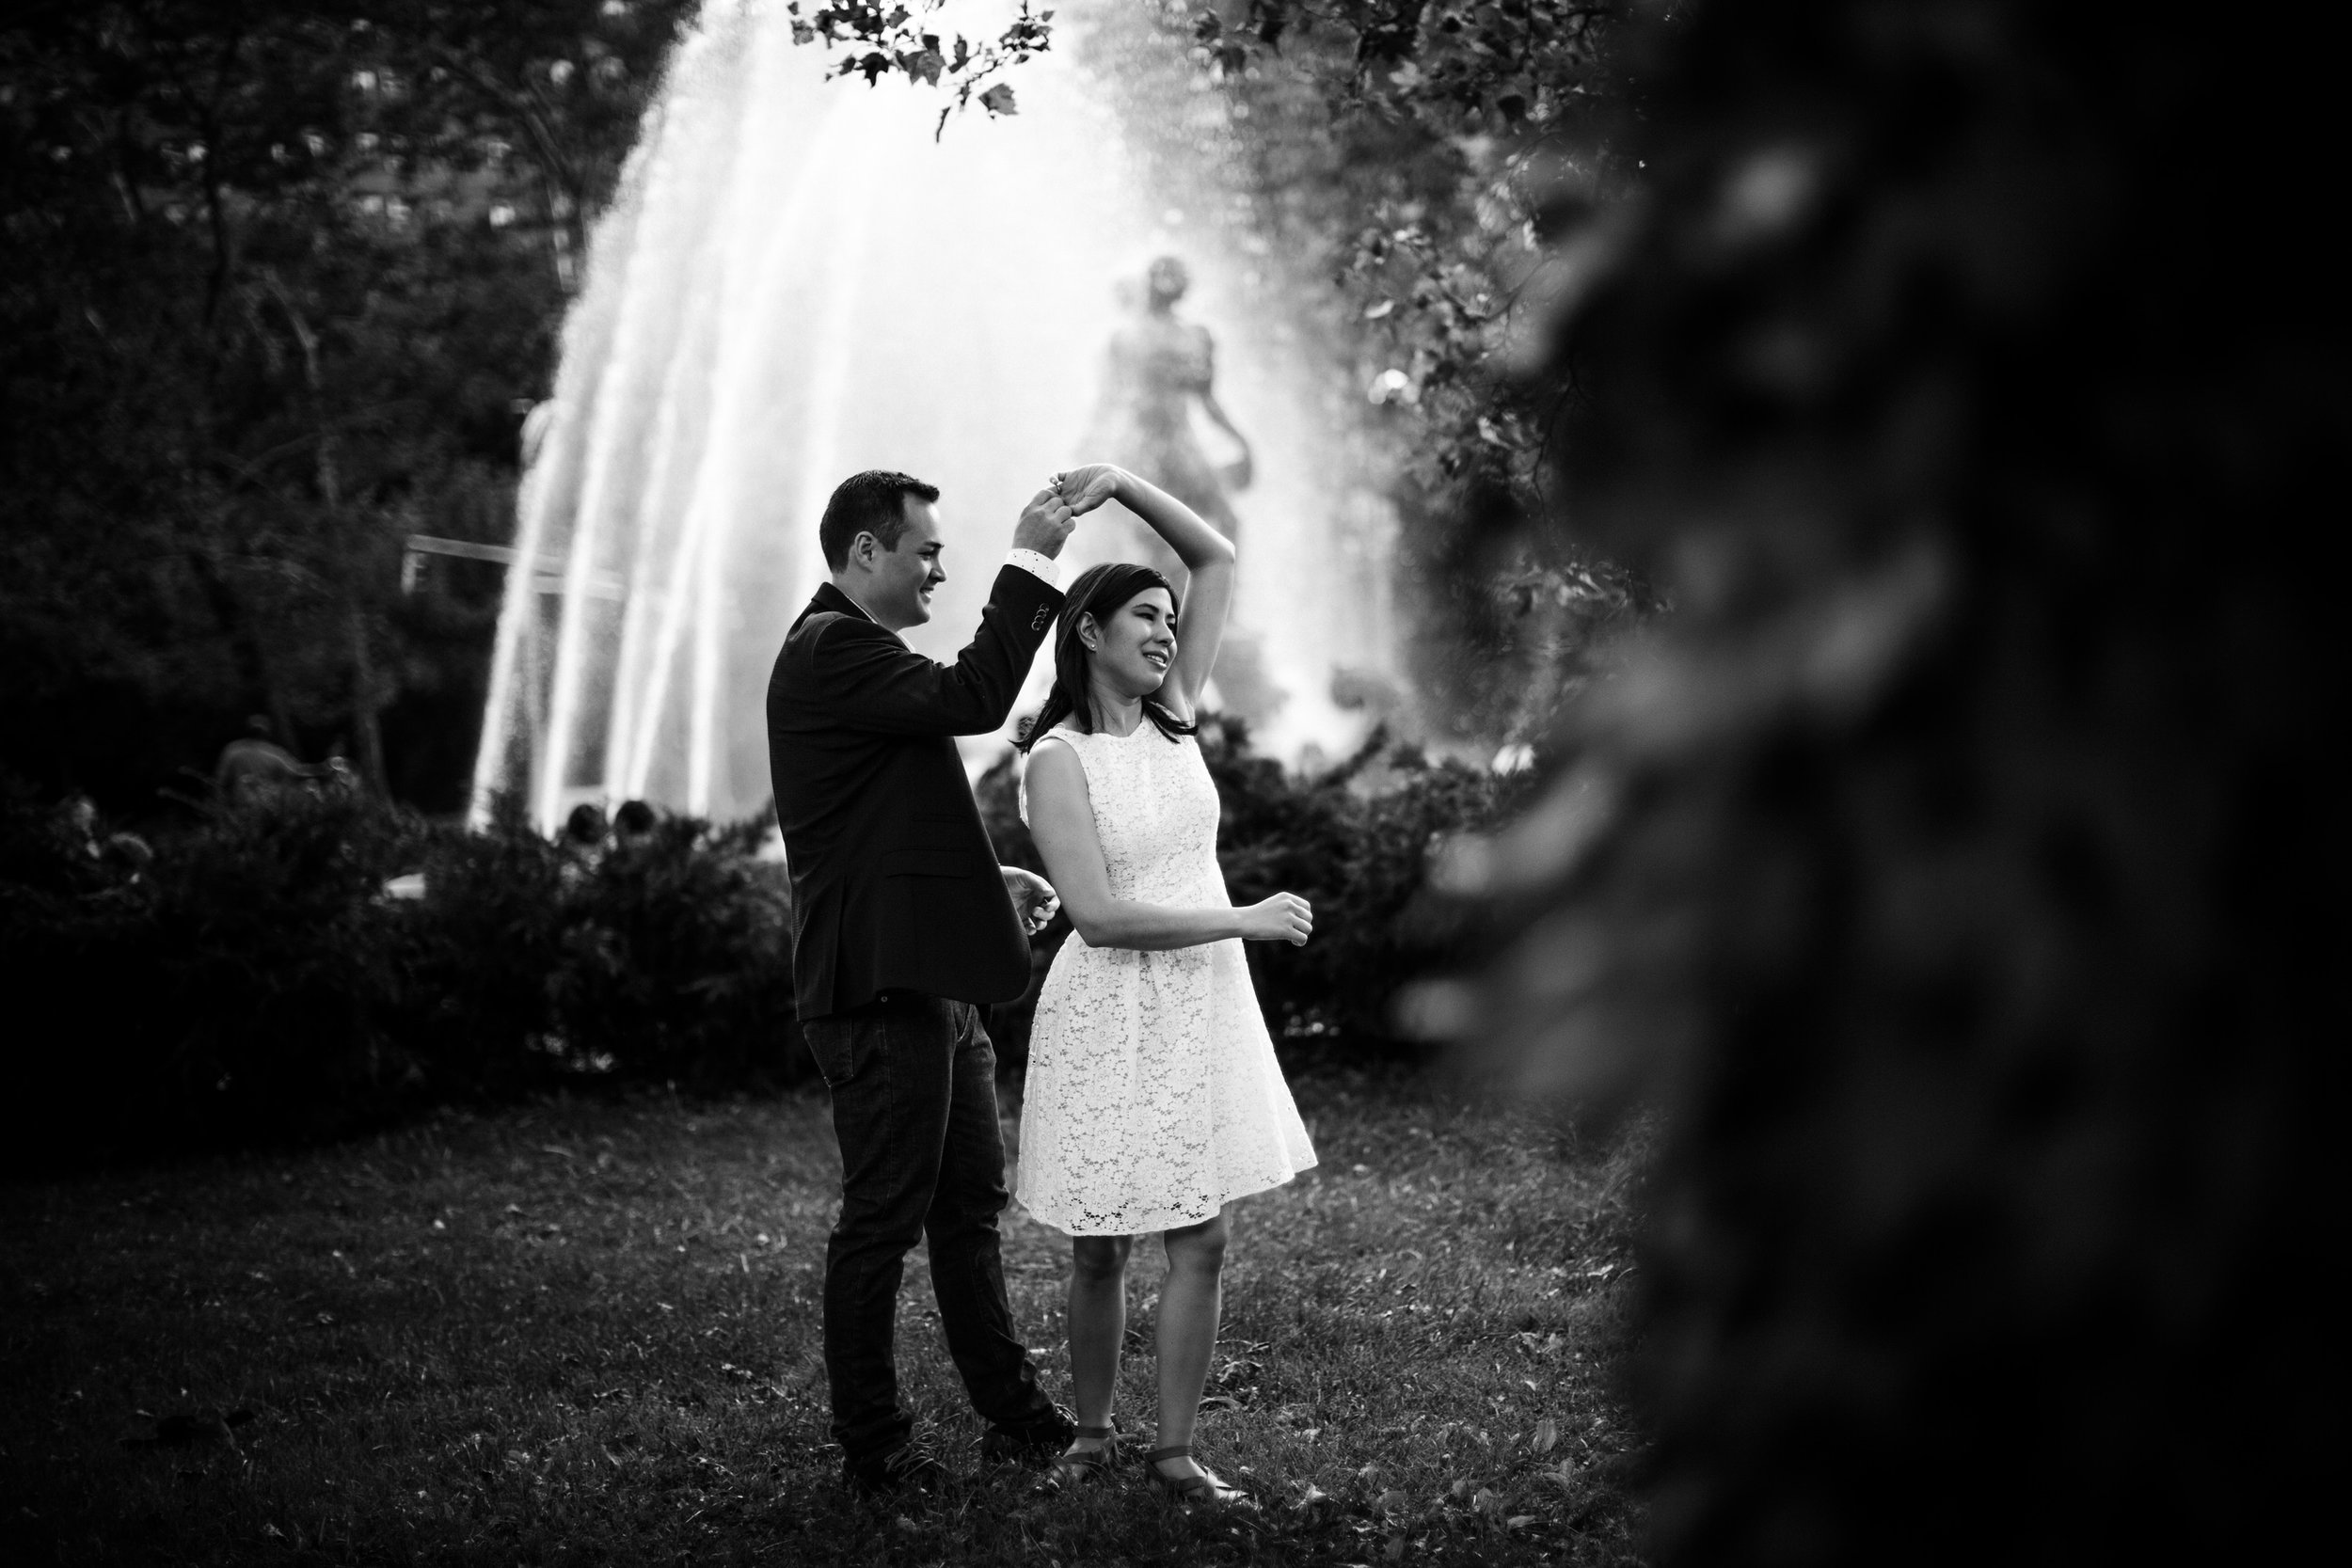 dancing_in_the_park_tiny_house_photo_moments_fountain_nyc_love_photography.jpg